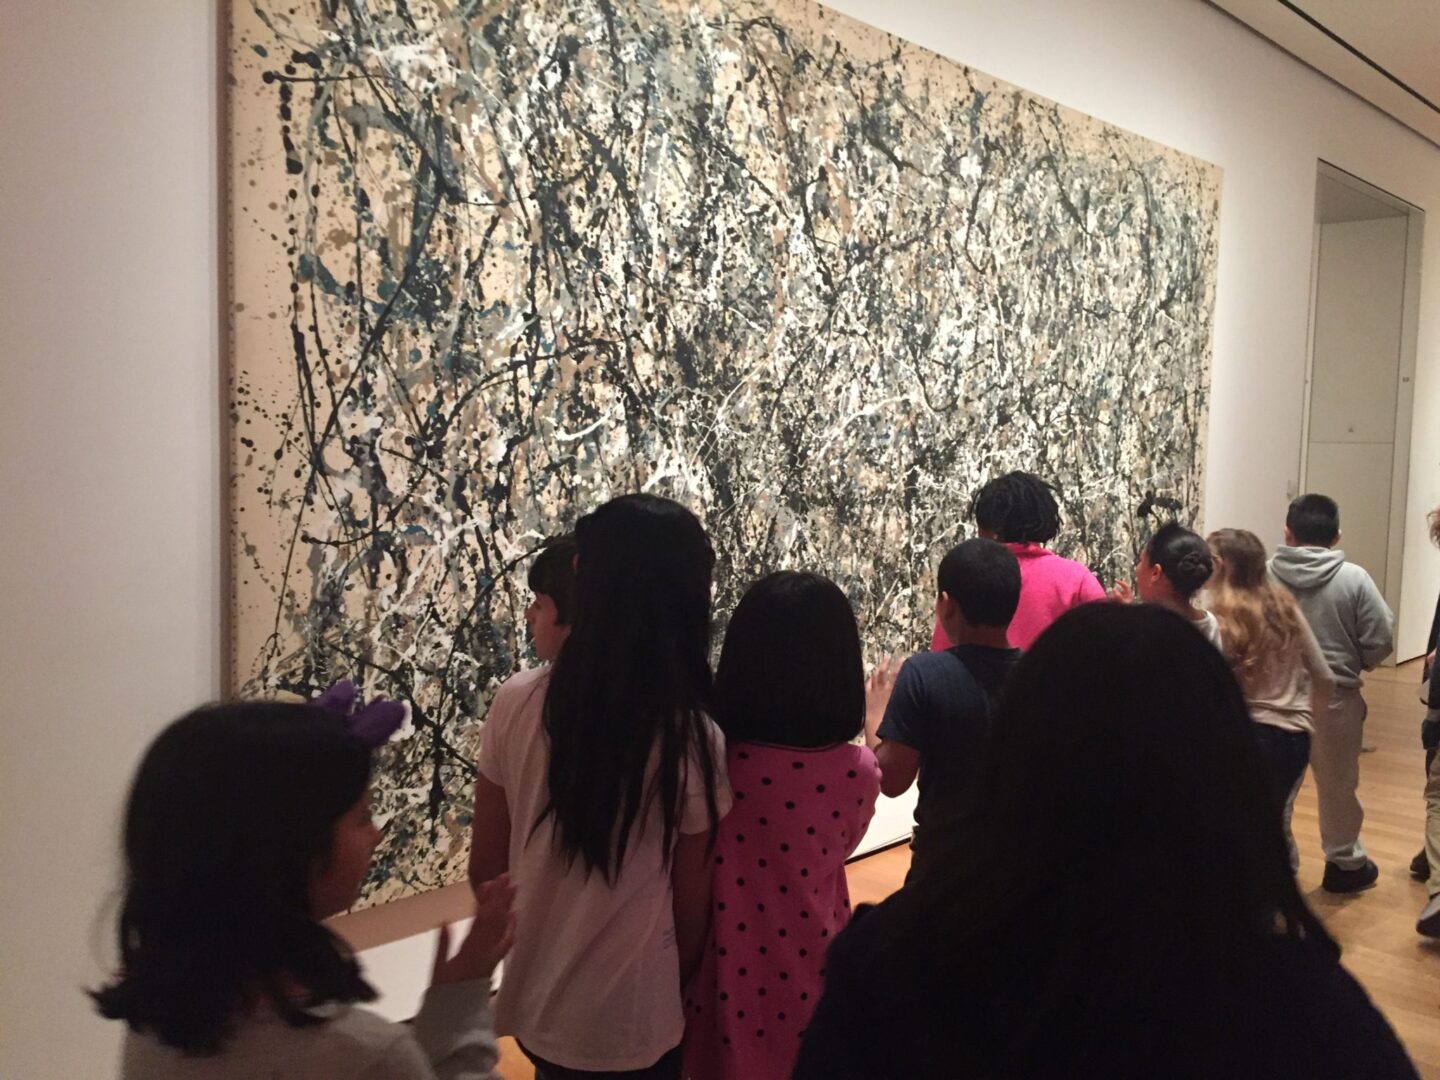 A group of children looking at a painting in an art museum.